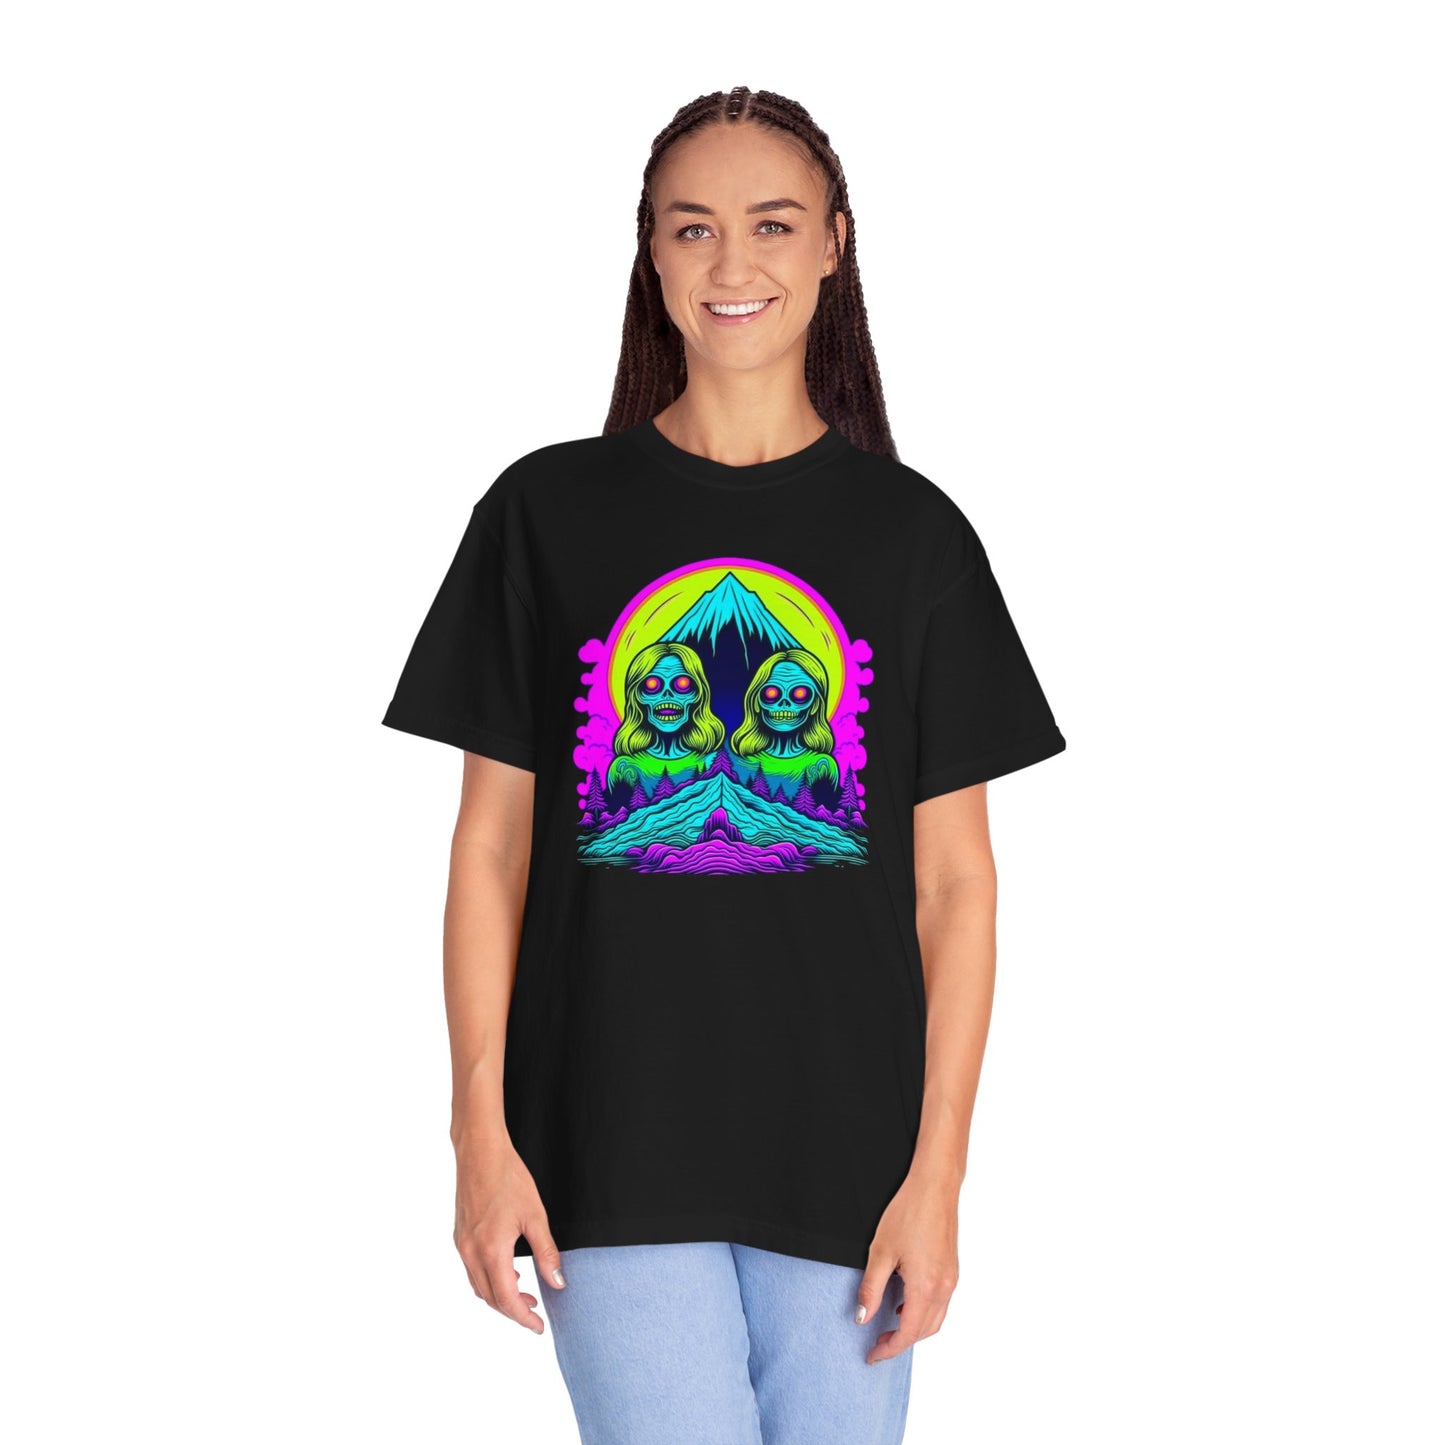 Woman in a stylish Zombie Tee T-shirt